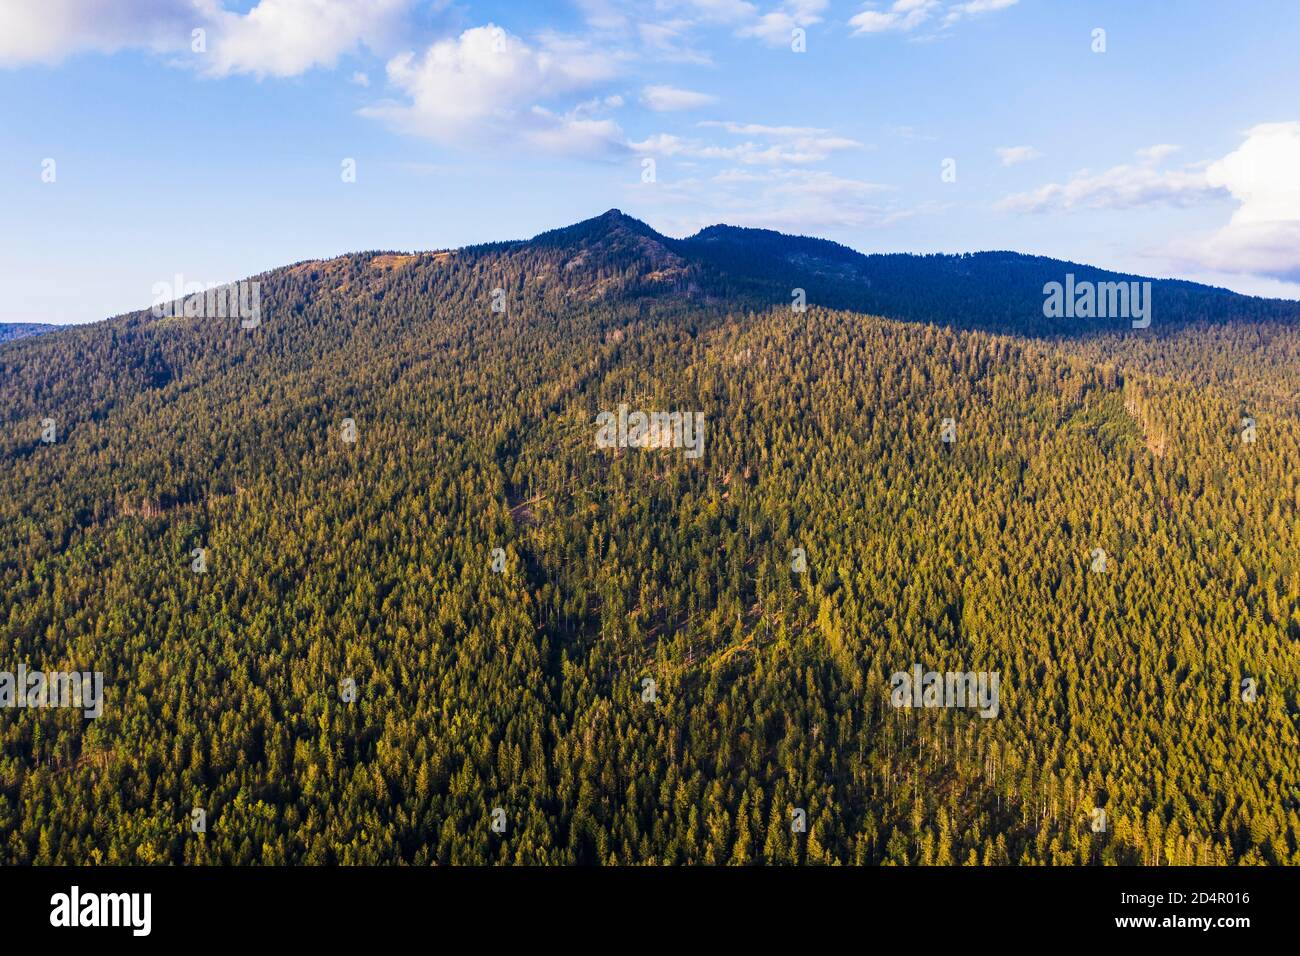 Small and Large Osser, Lamer Winkel, drone recording, Bavarian Forest, Upper Palatinate, Bavaria, Germany, Europe Stock Photo